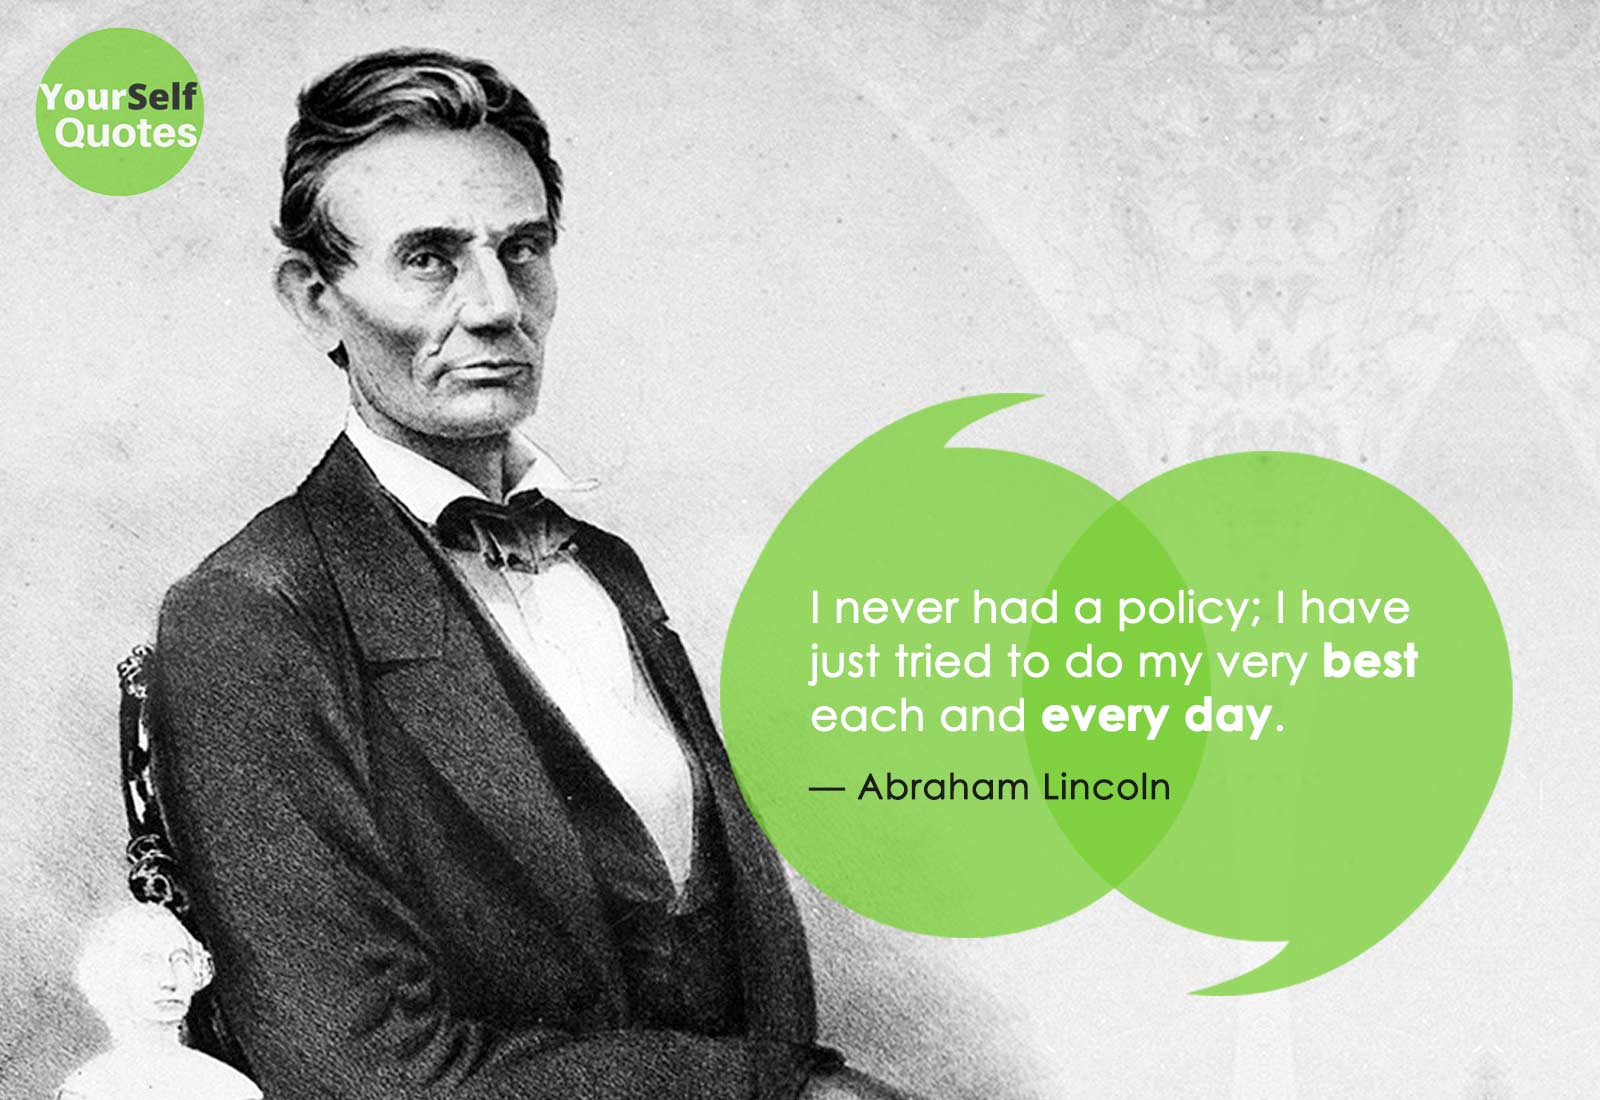 Quotes on Education by Abraham Lincoln